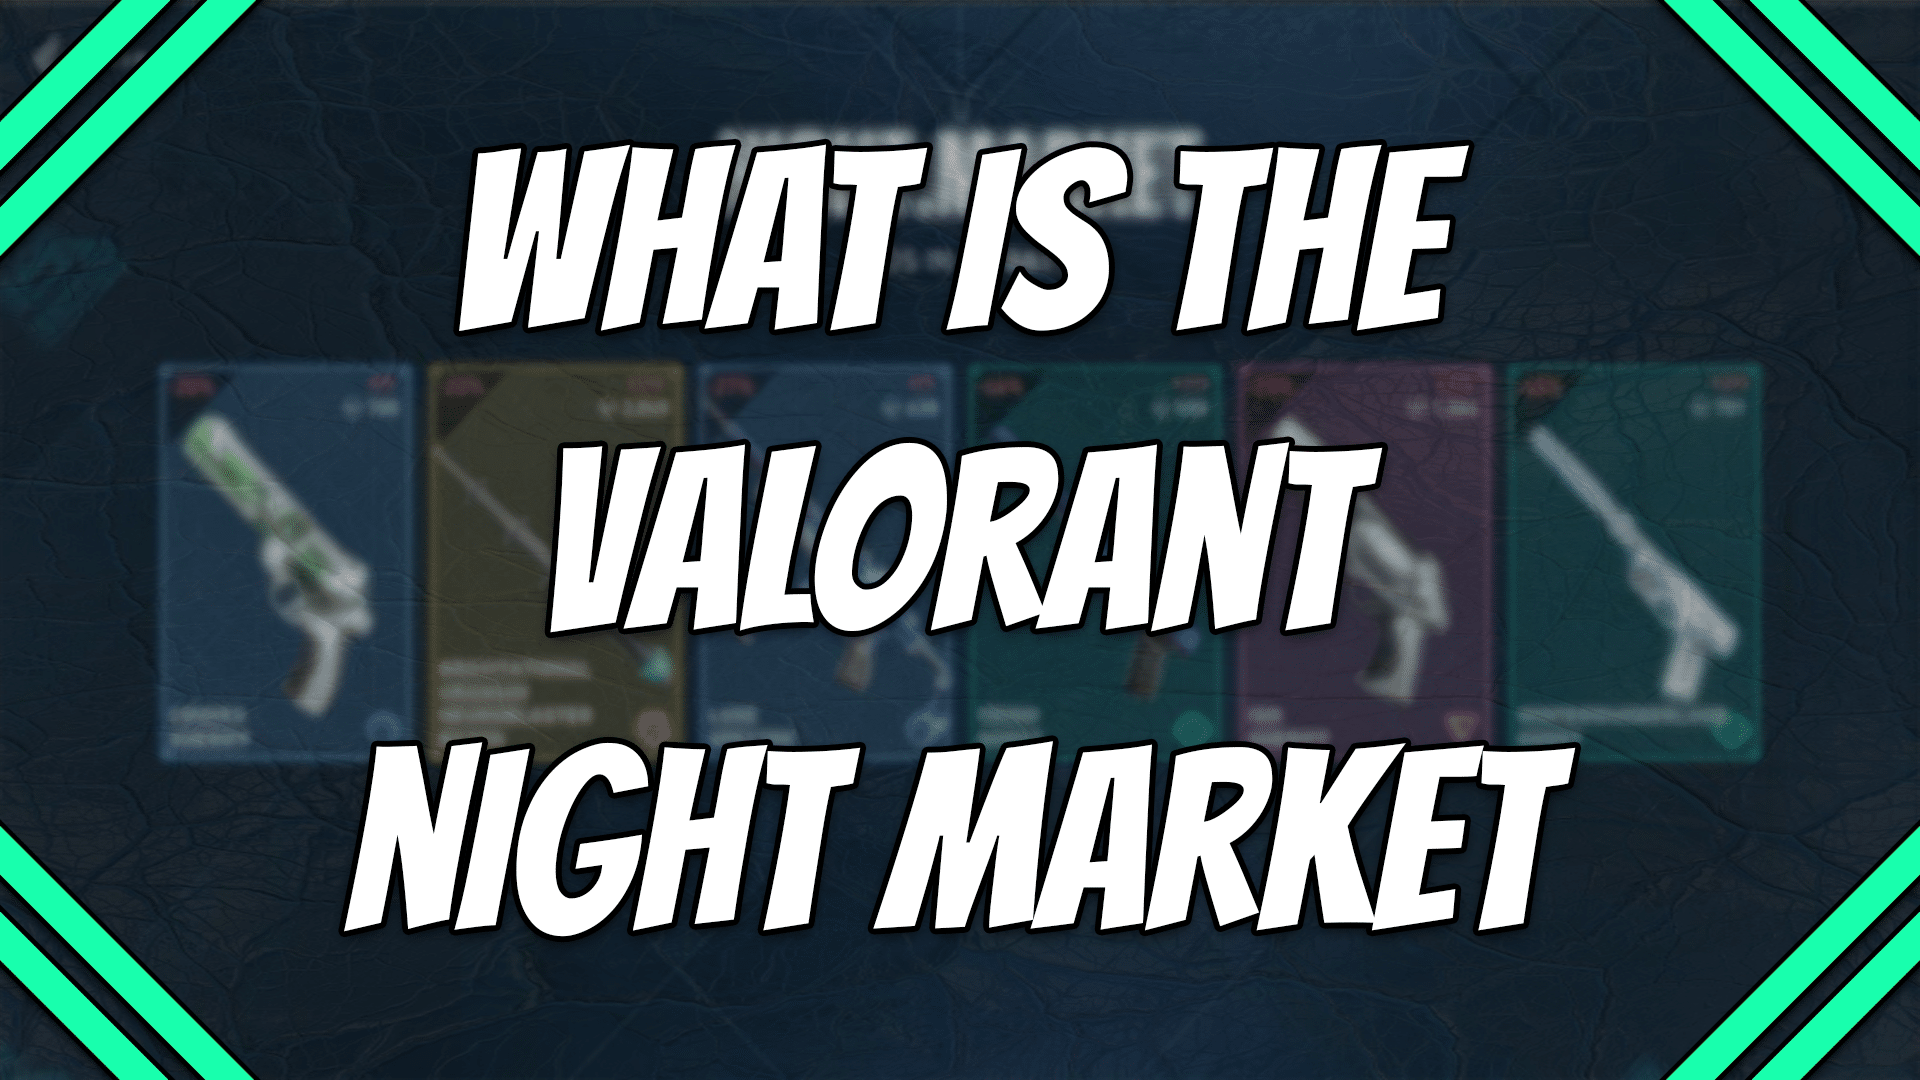 What is the Valorant Night Market title card